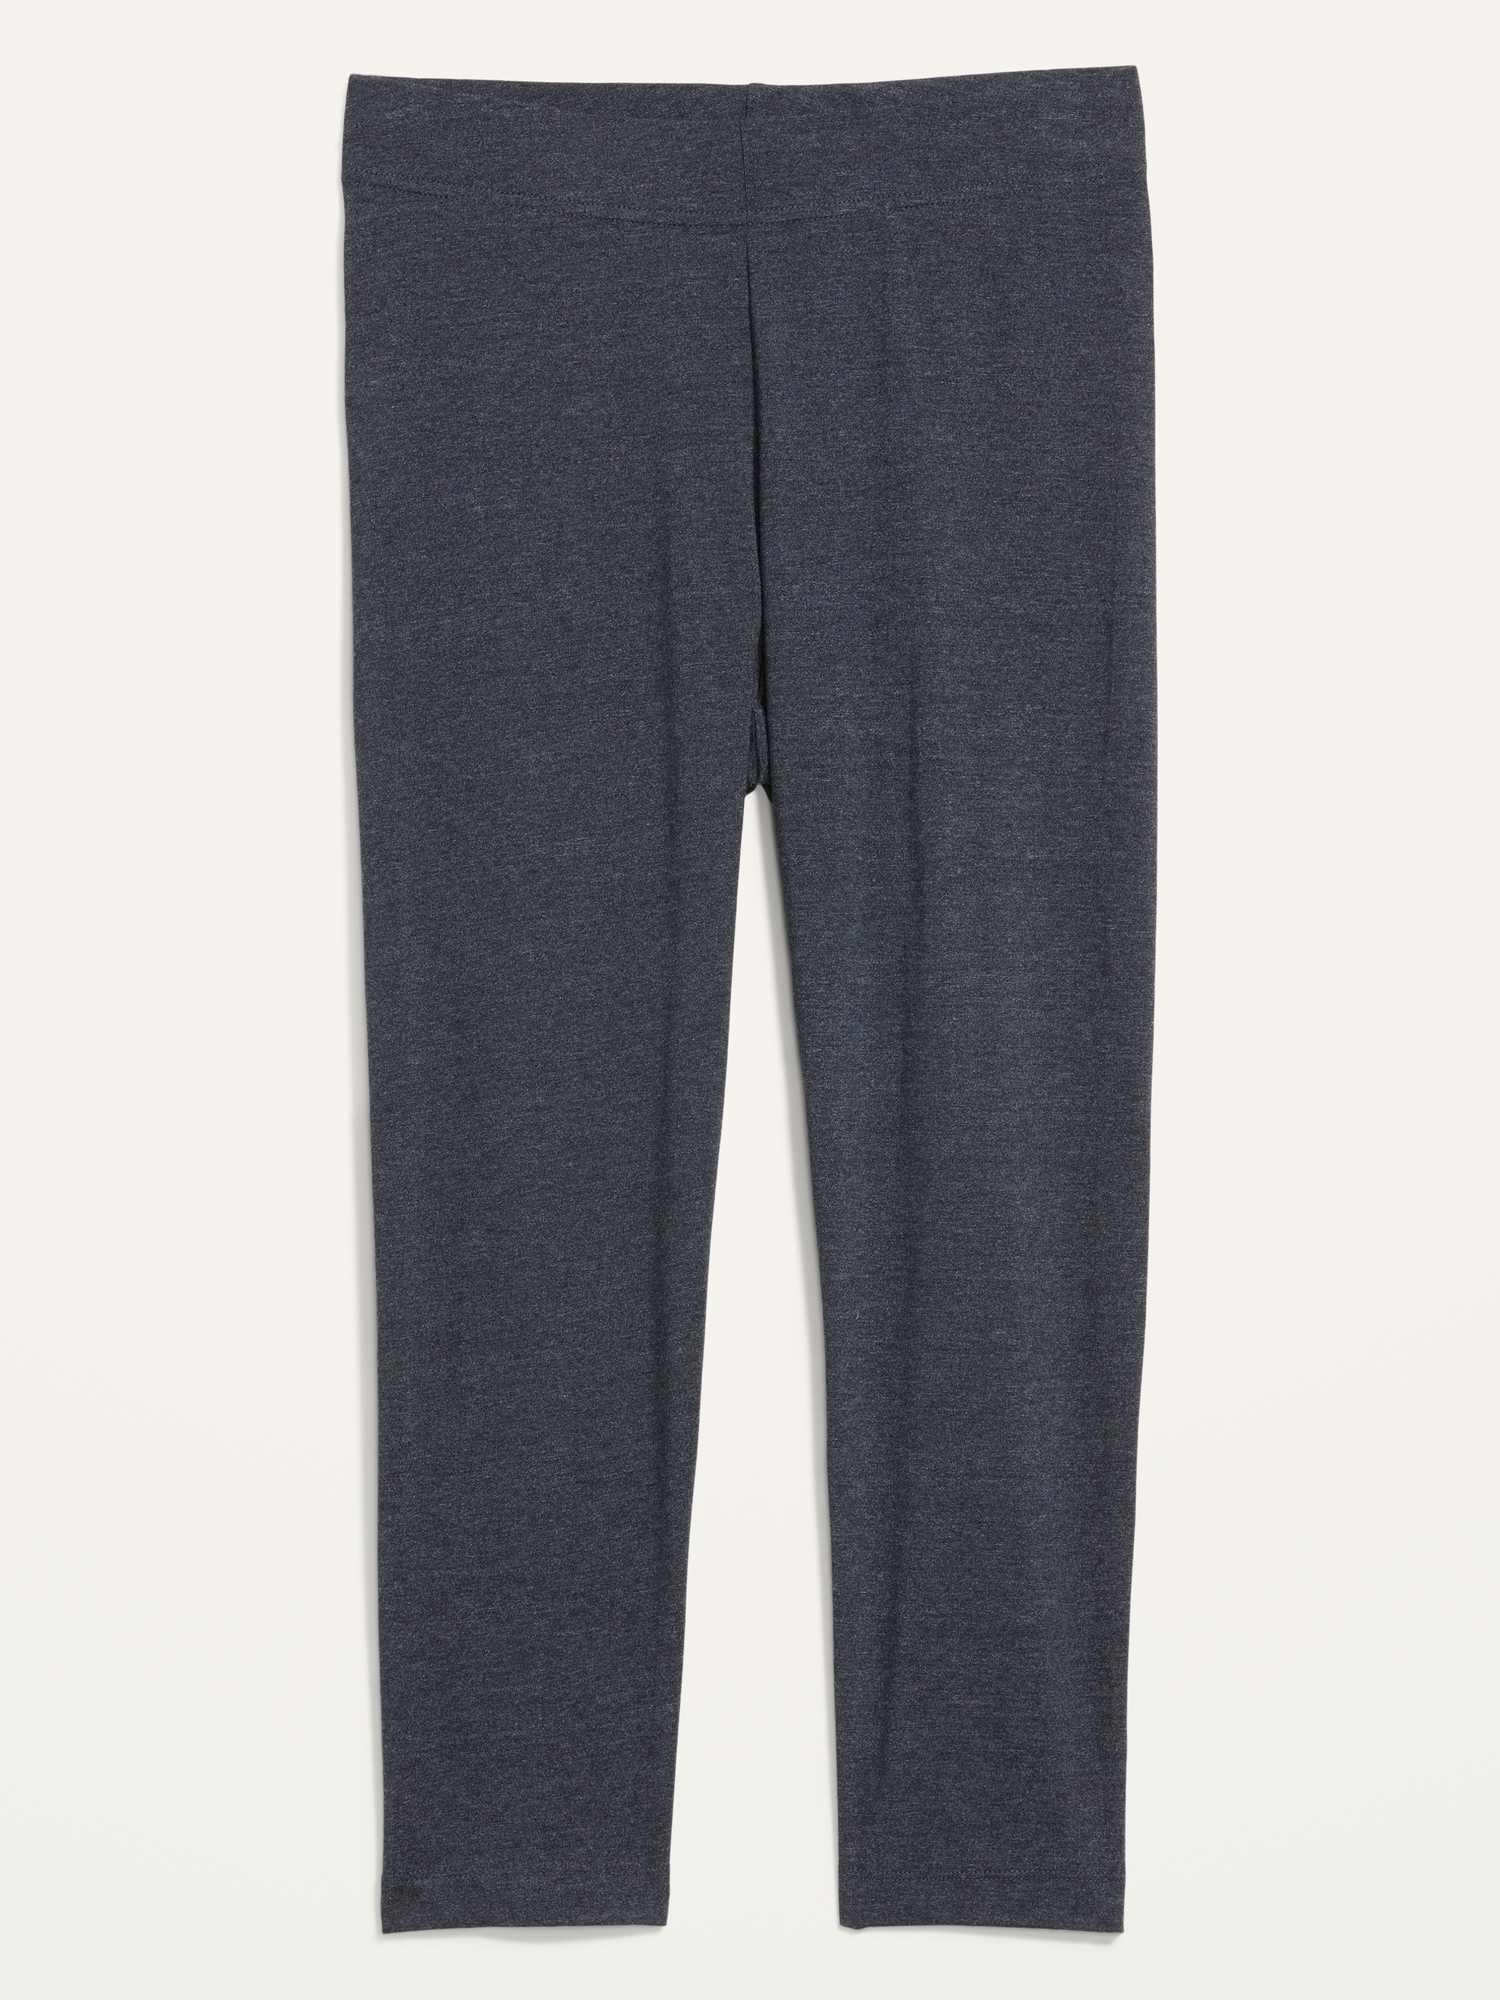 High-Waisted Crop Leggings | Old Navy